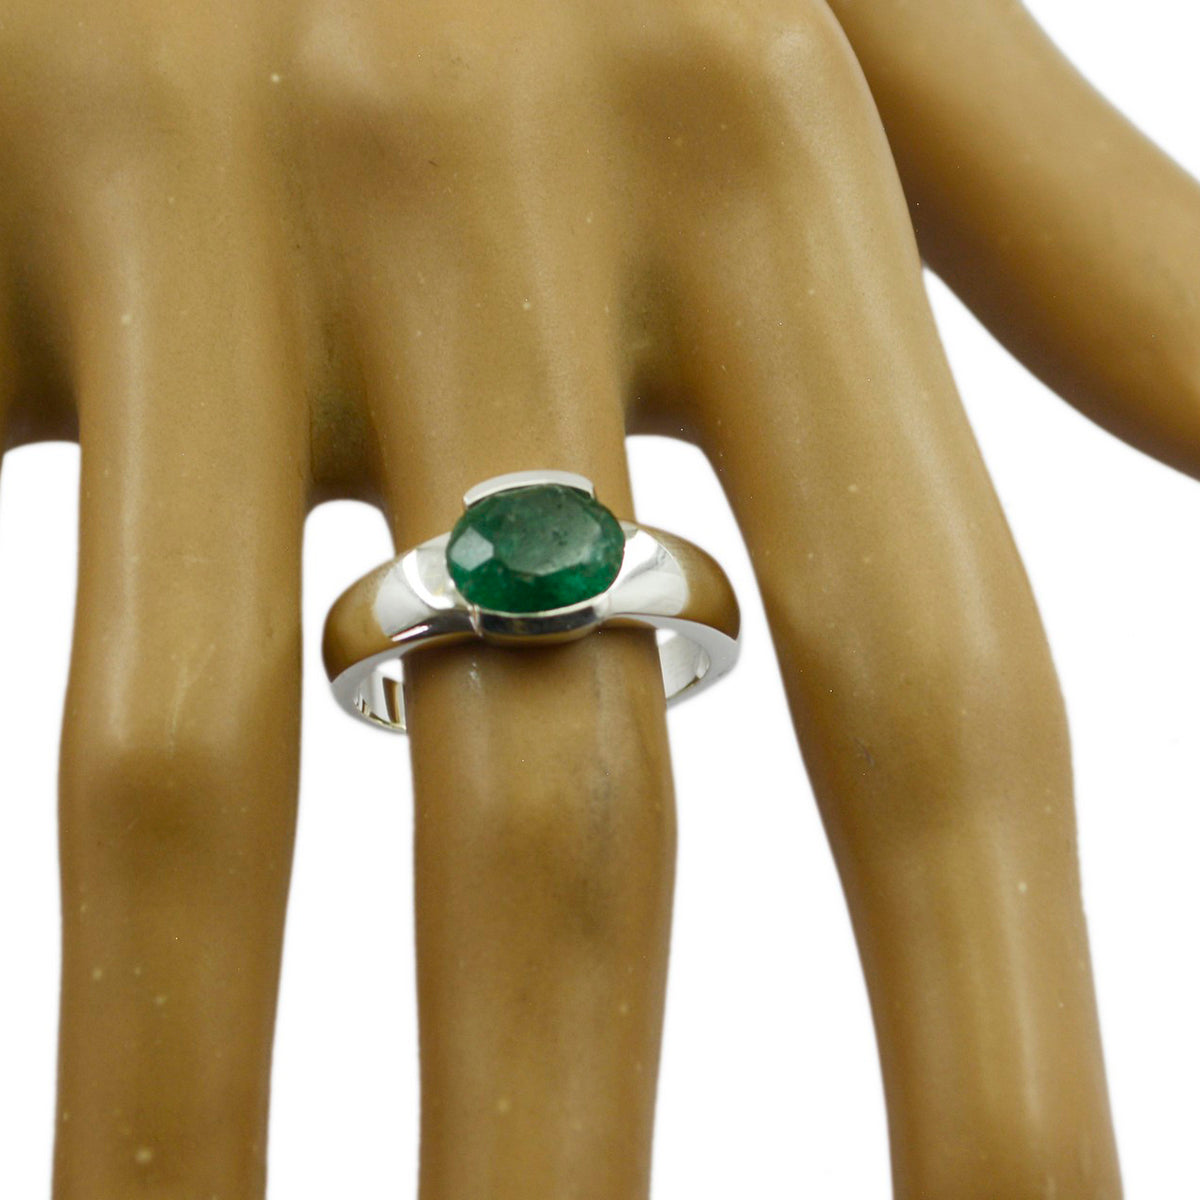 Bonny Gem Indianemerald Silver Ring Jewelry For Ashes Of Loved Ones